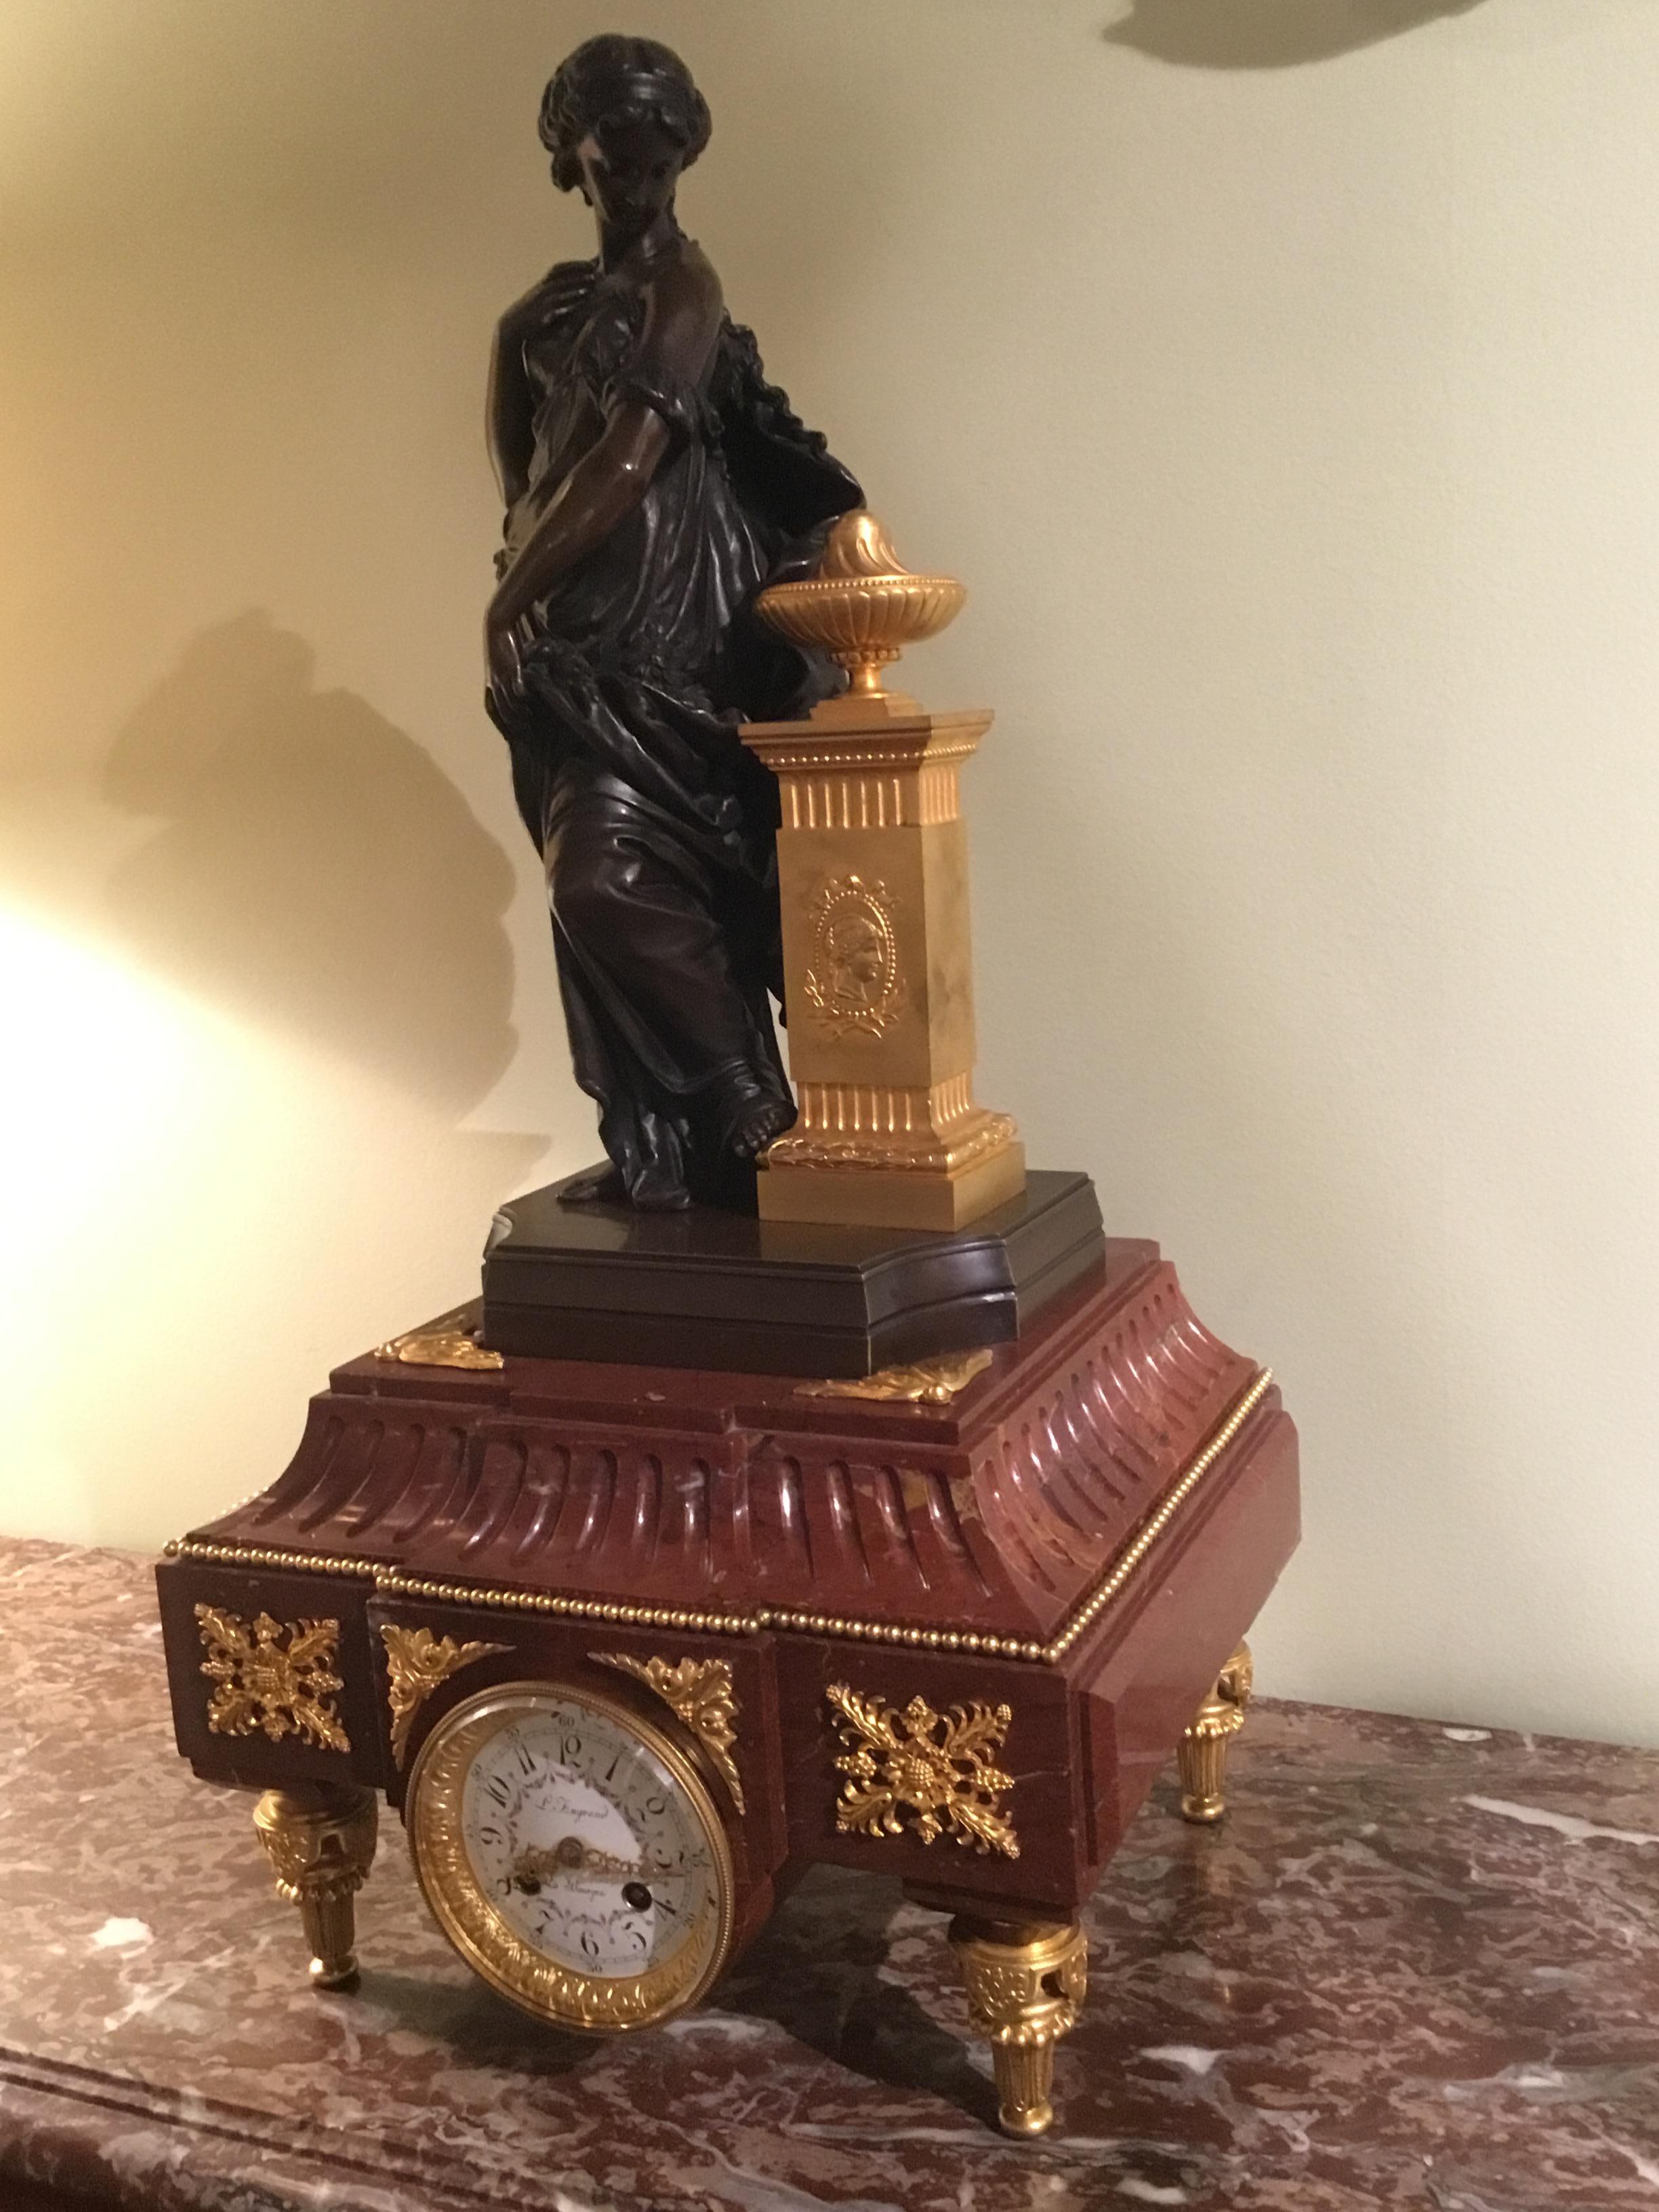 Exceptional presentation of a beautiful bronze sitting on top of a plateau of griotte
Marble, 19th century. The clock face is enamel with floral and foliate paintings surrounding the
Numeral. Bronze dore mounts decorate this lovely base. Toupee